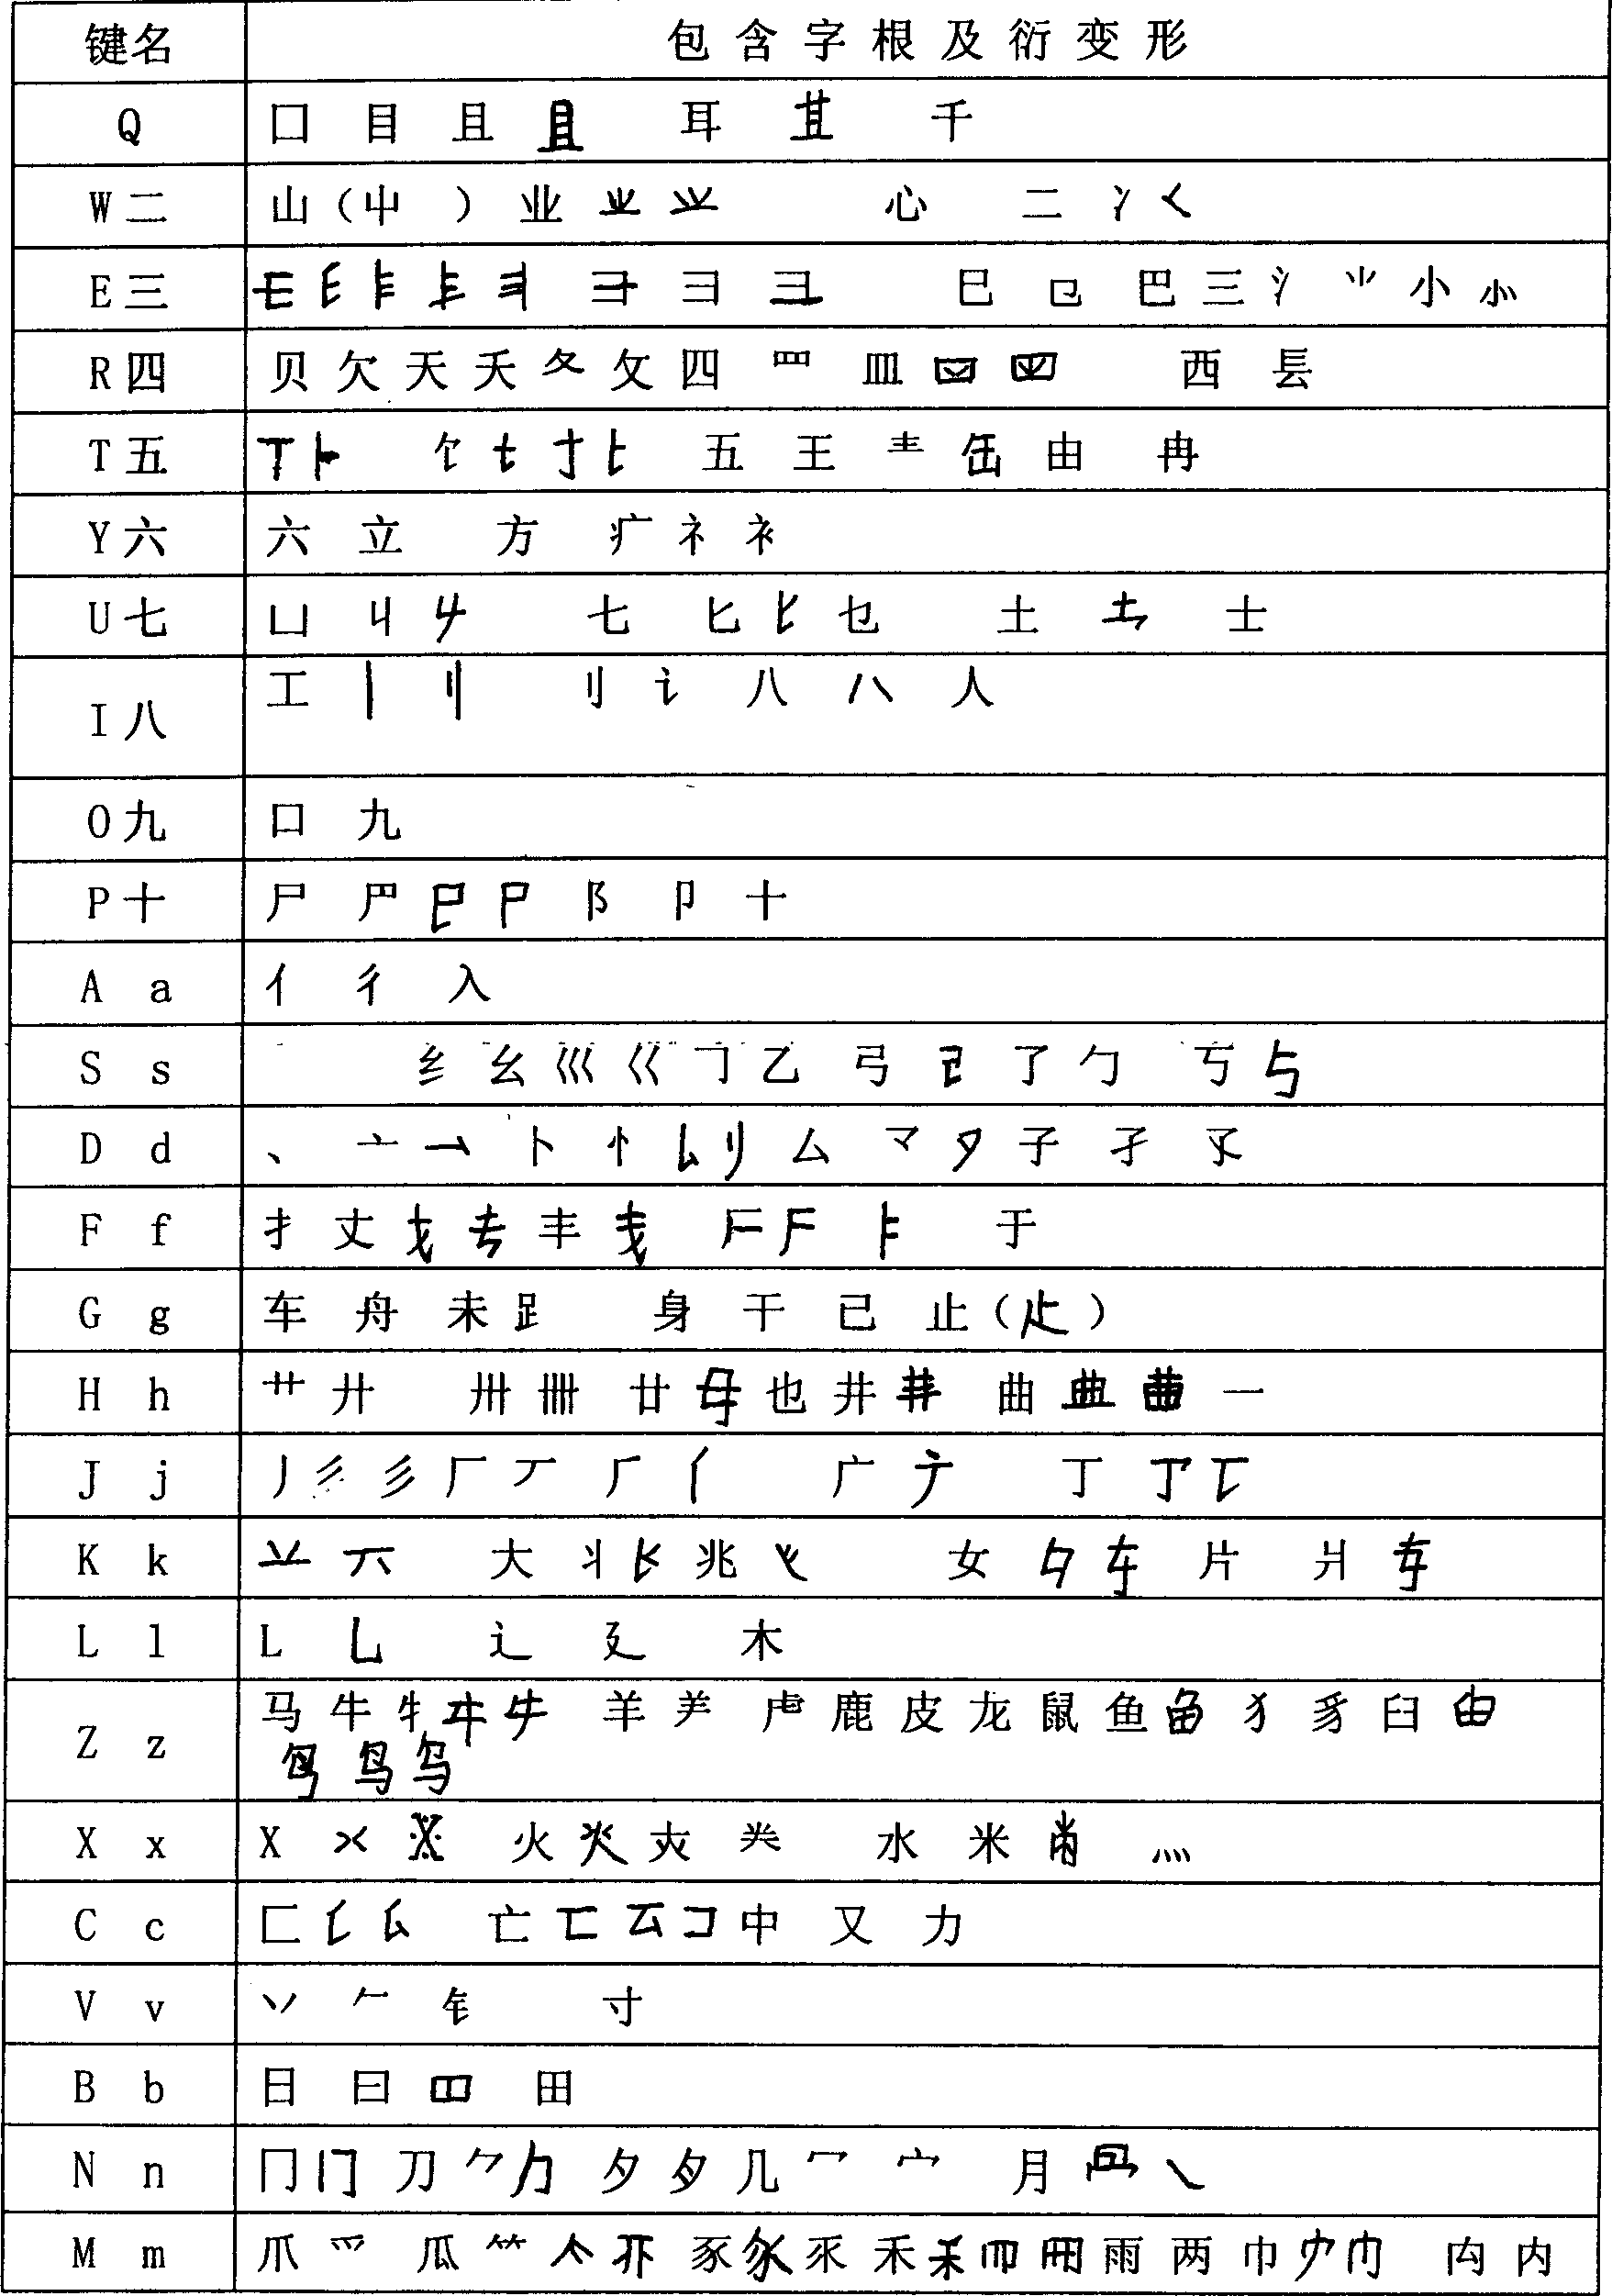 Square round classify pictographic code input method for Chinese characters